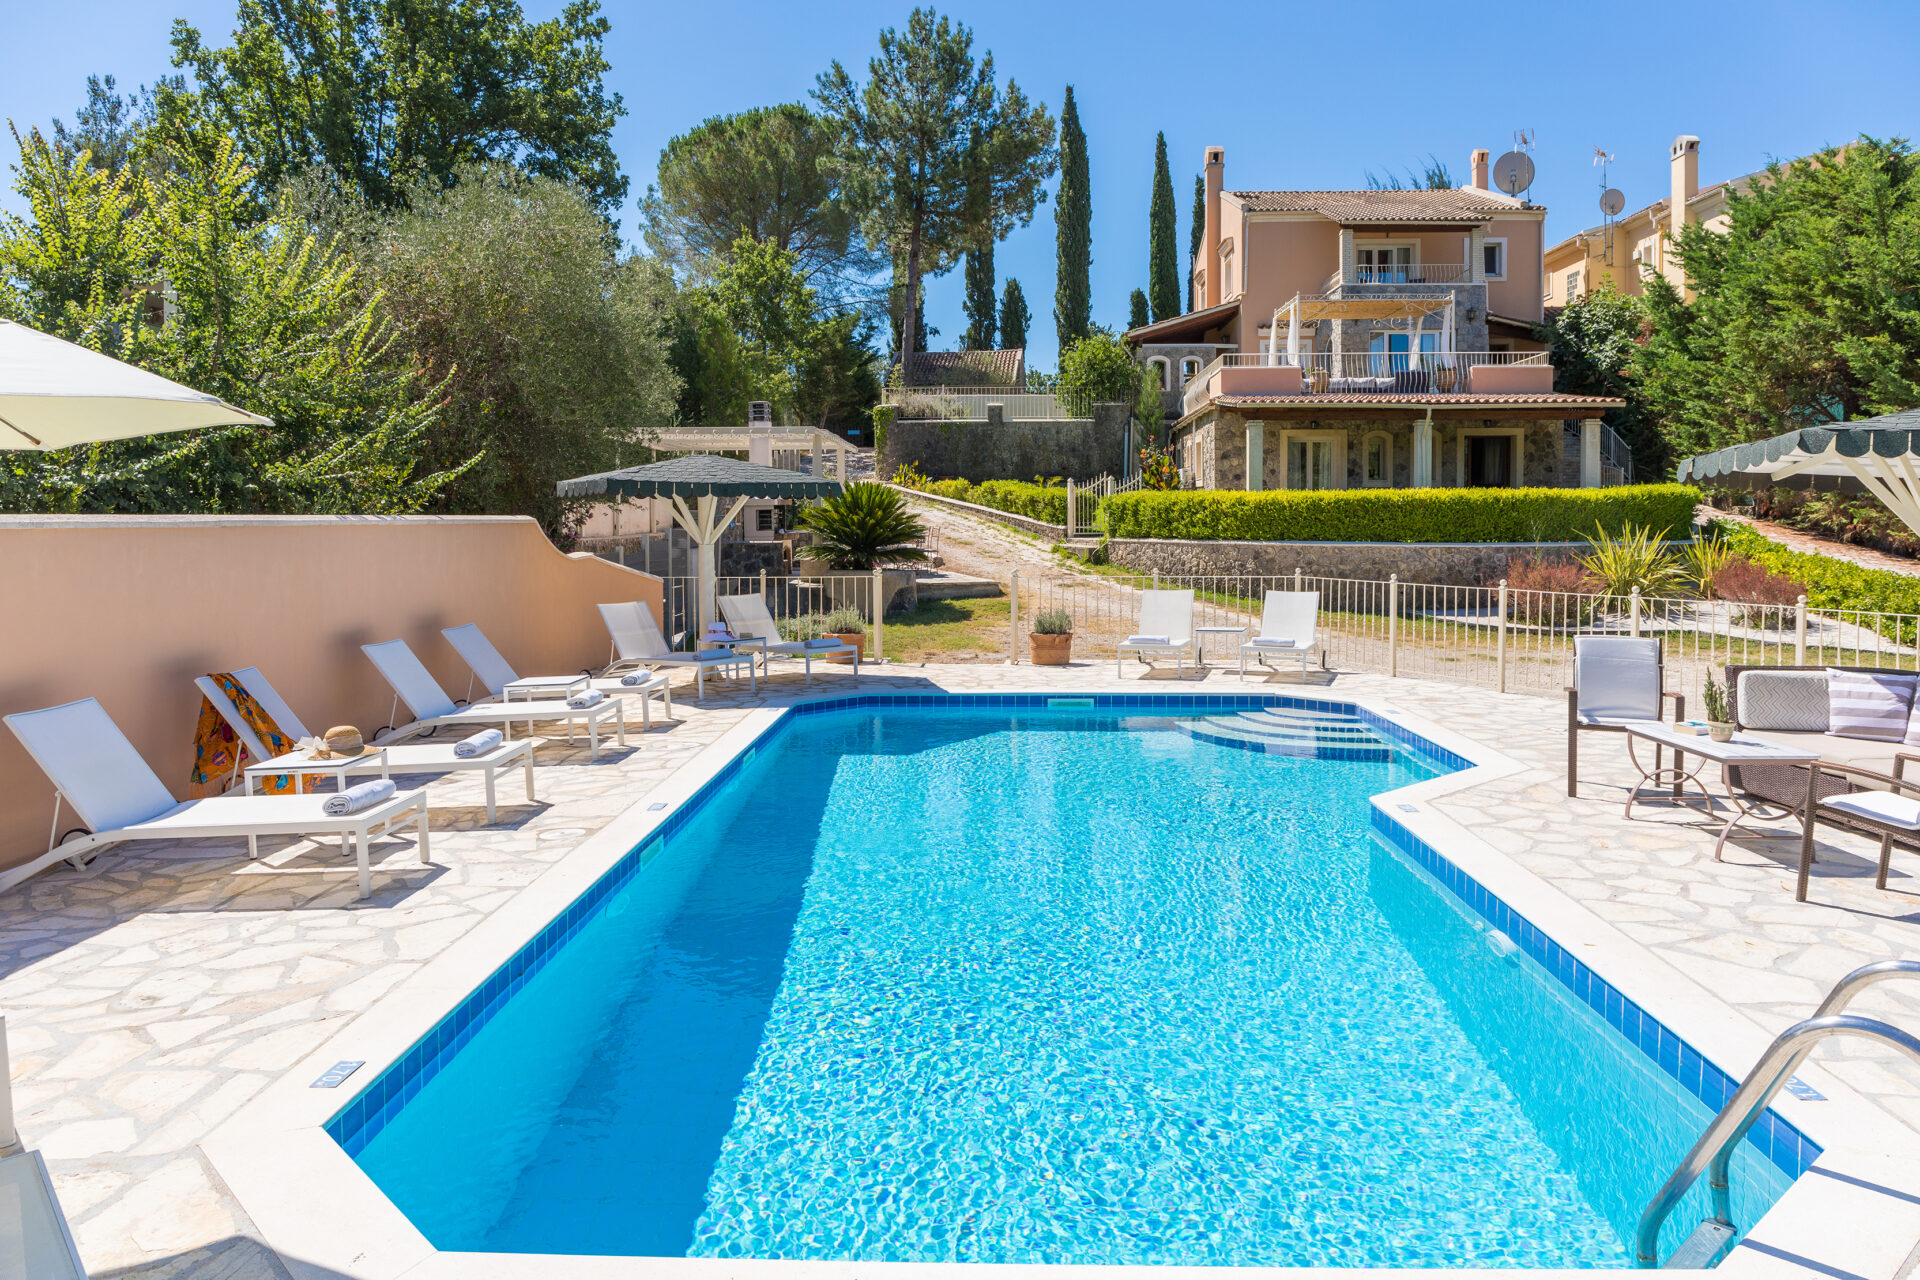 Villa St. Nicholas House, Family Friendly, Private Large Pool, 300m to the beach.